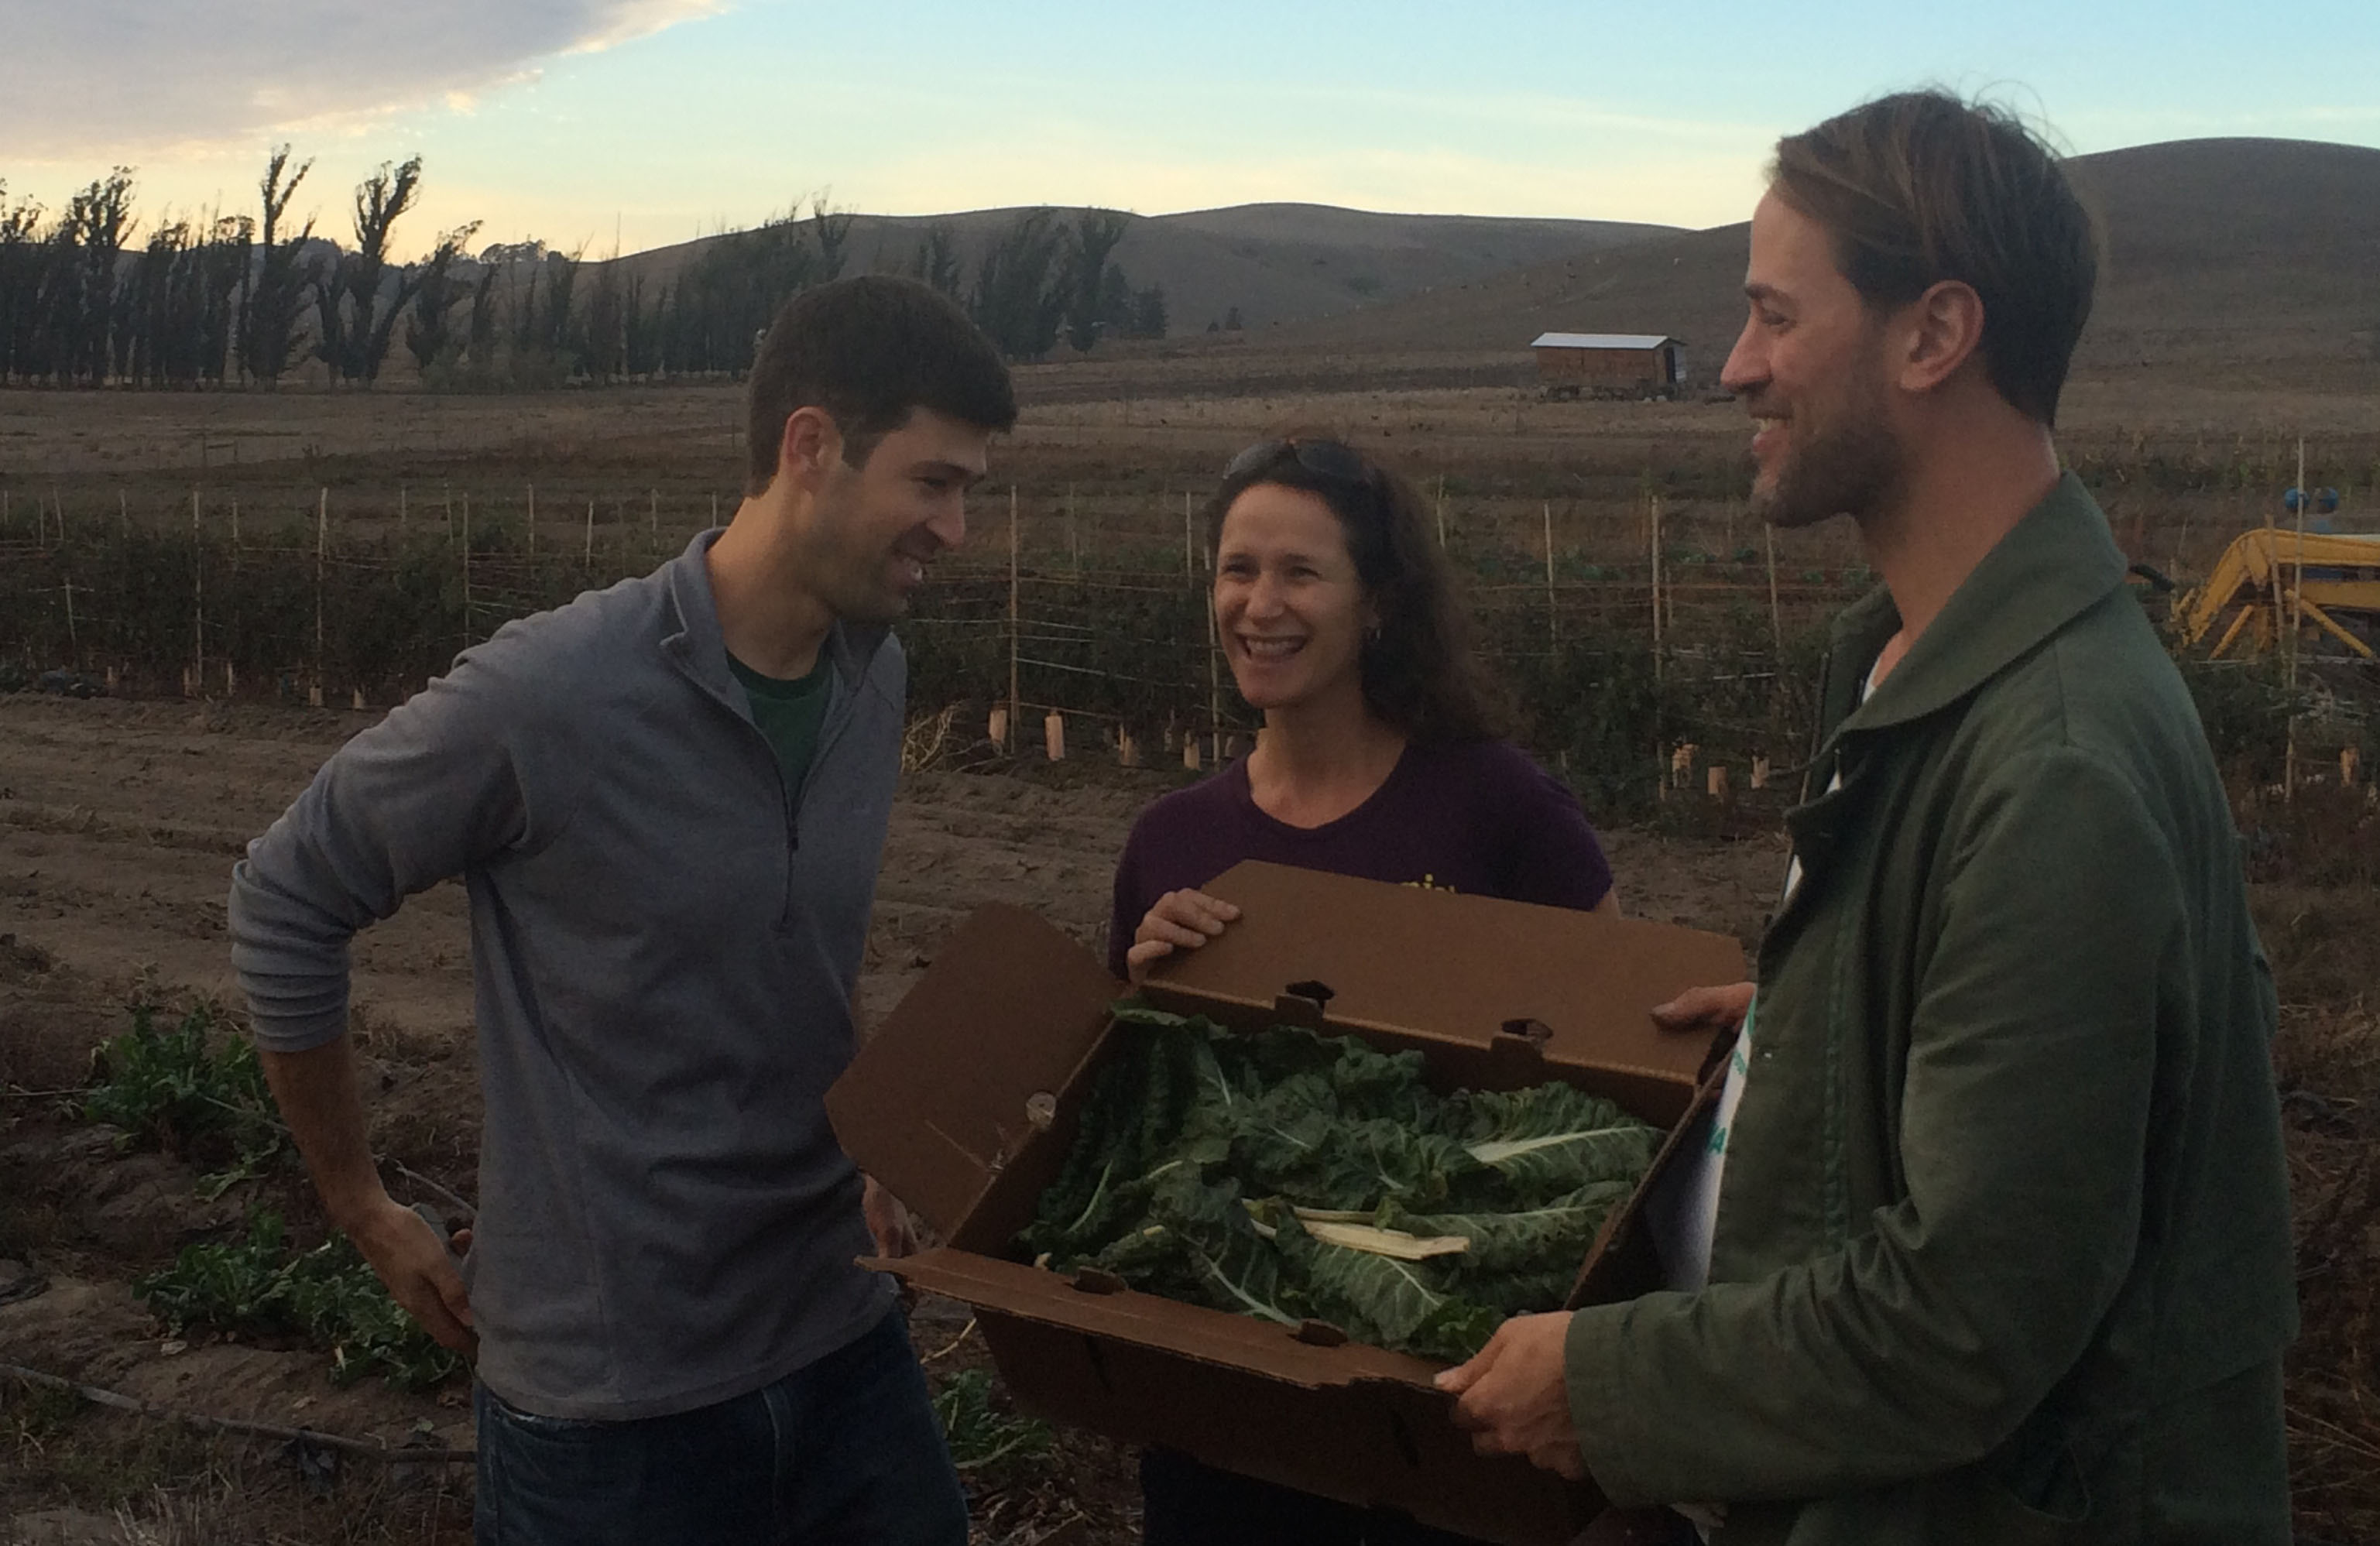 Jonathan Bloom, Dana Gunders and Tristram Stuart show what they gleaned at Bloomfield Organics for Feeding the 5000: Oakland